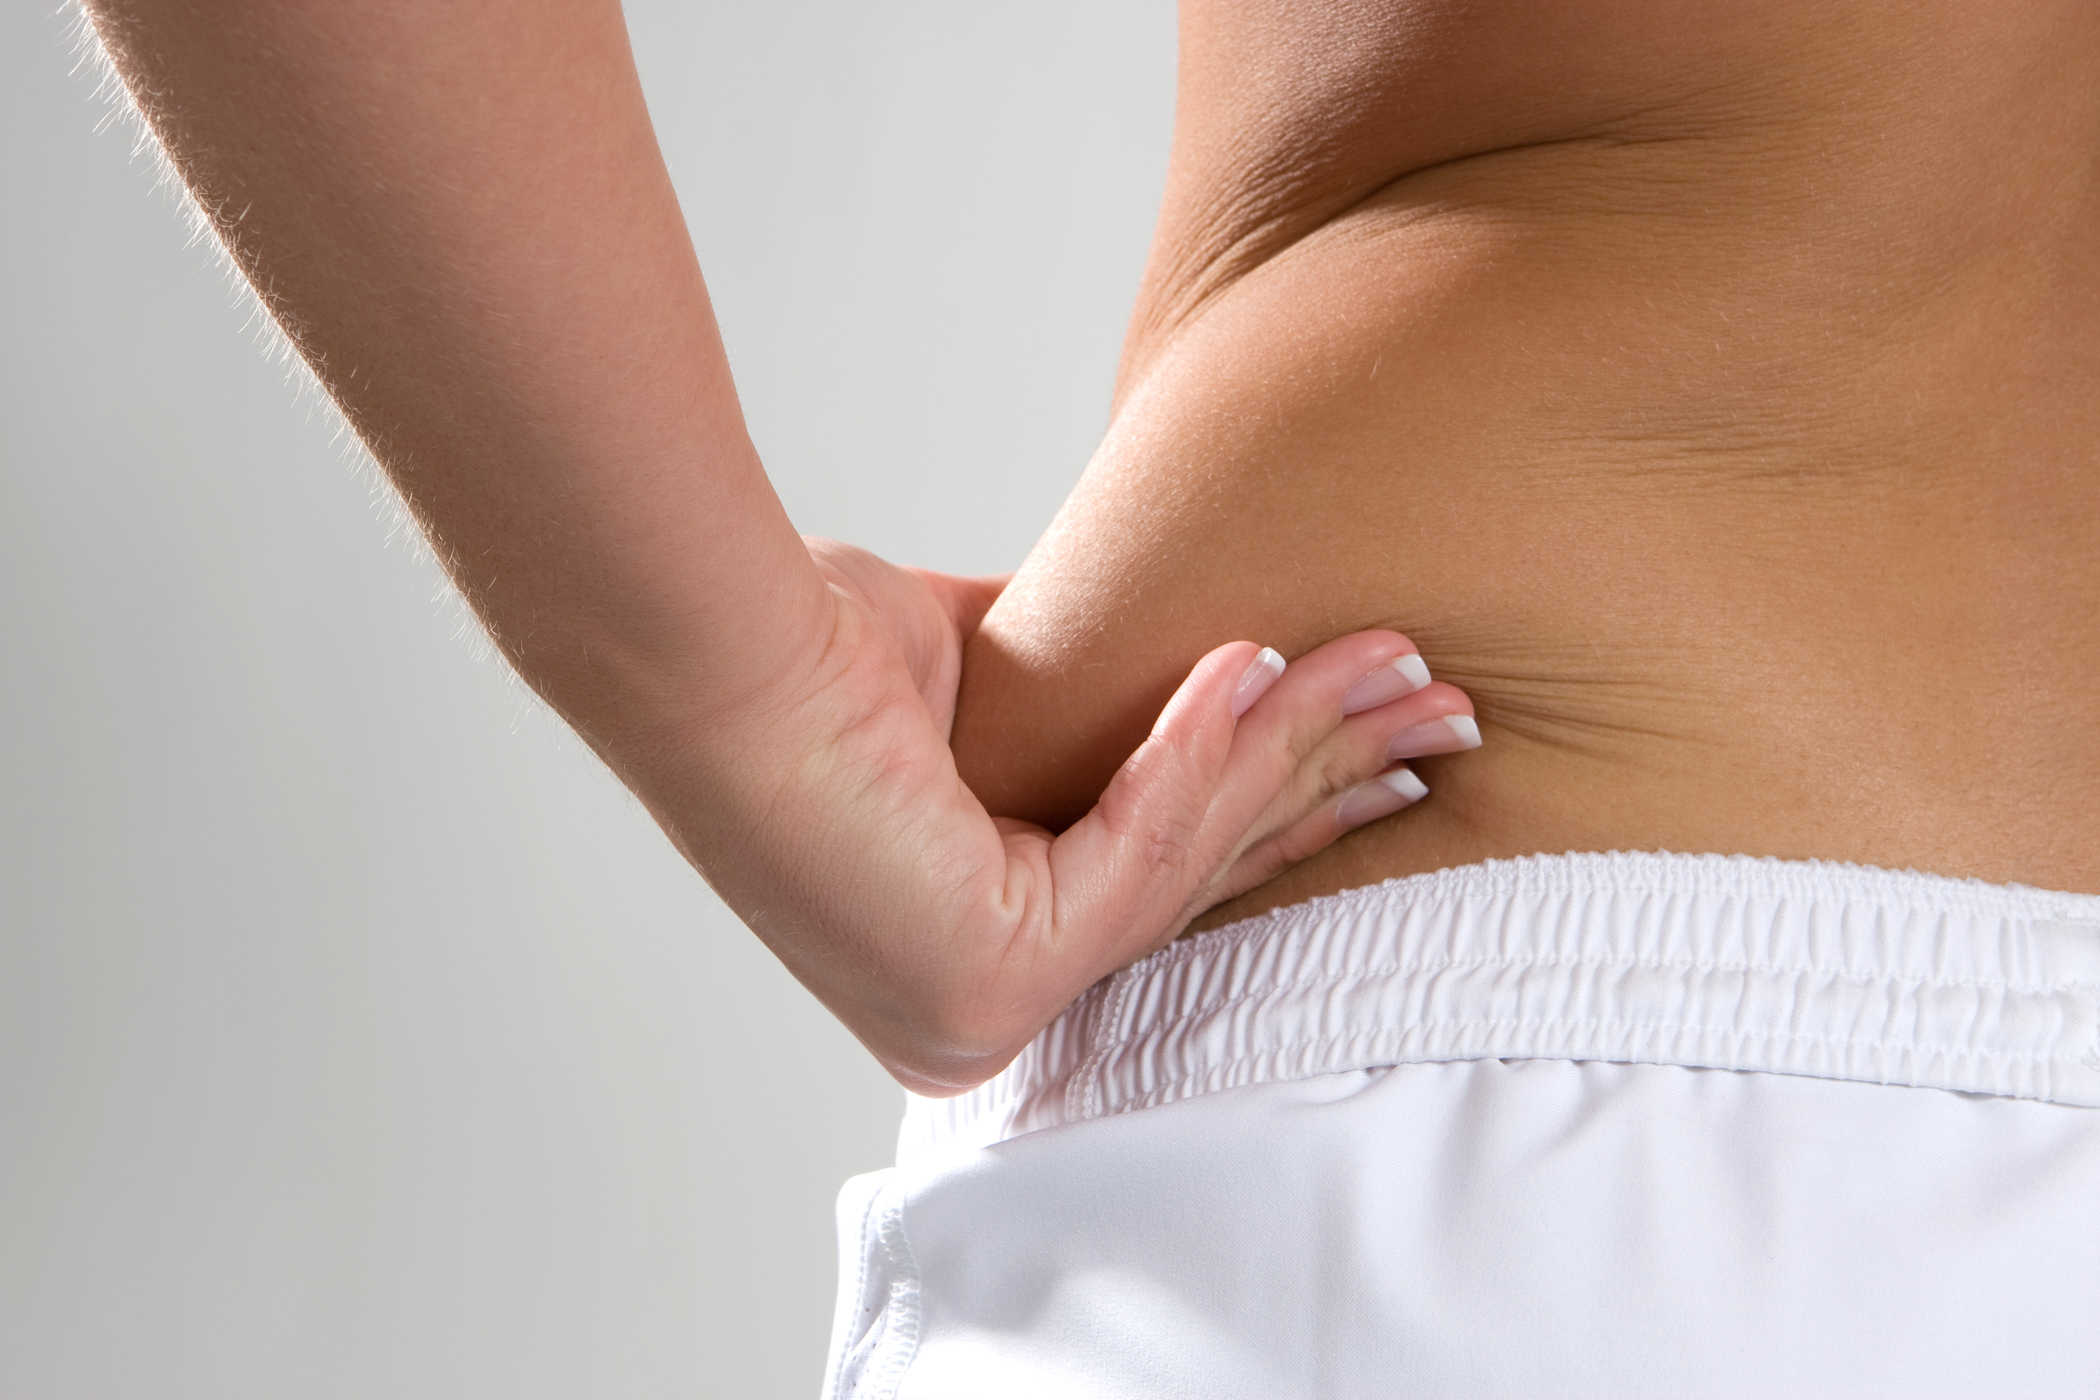 how to operate liposuction costs